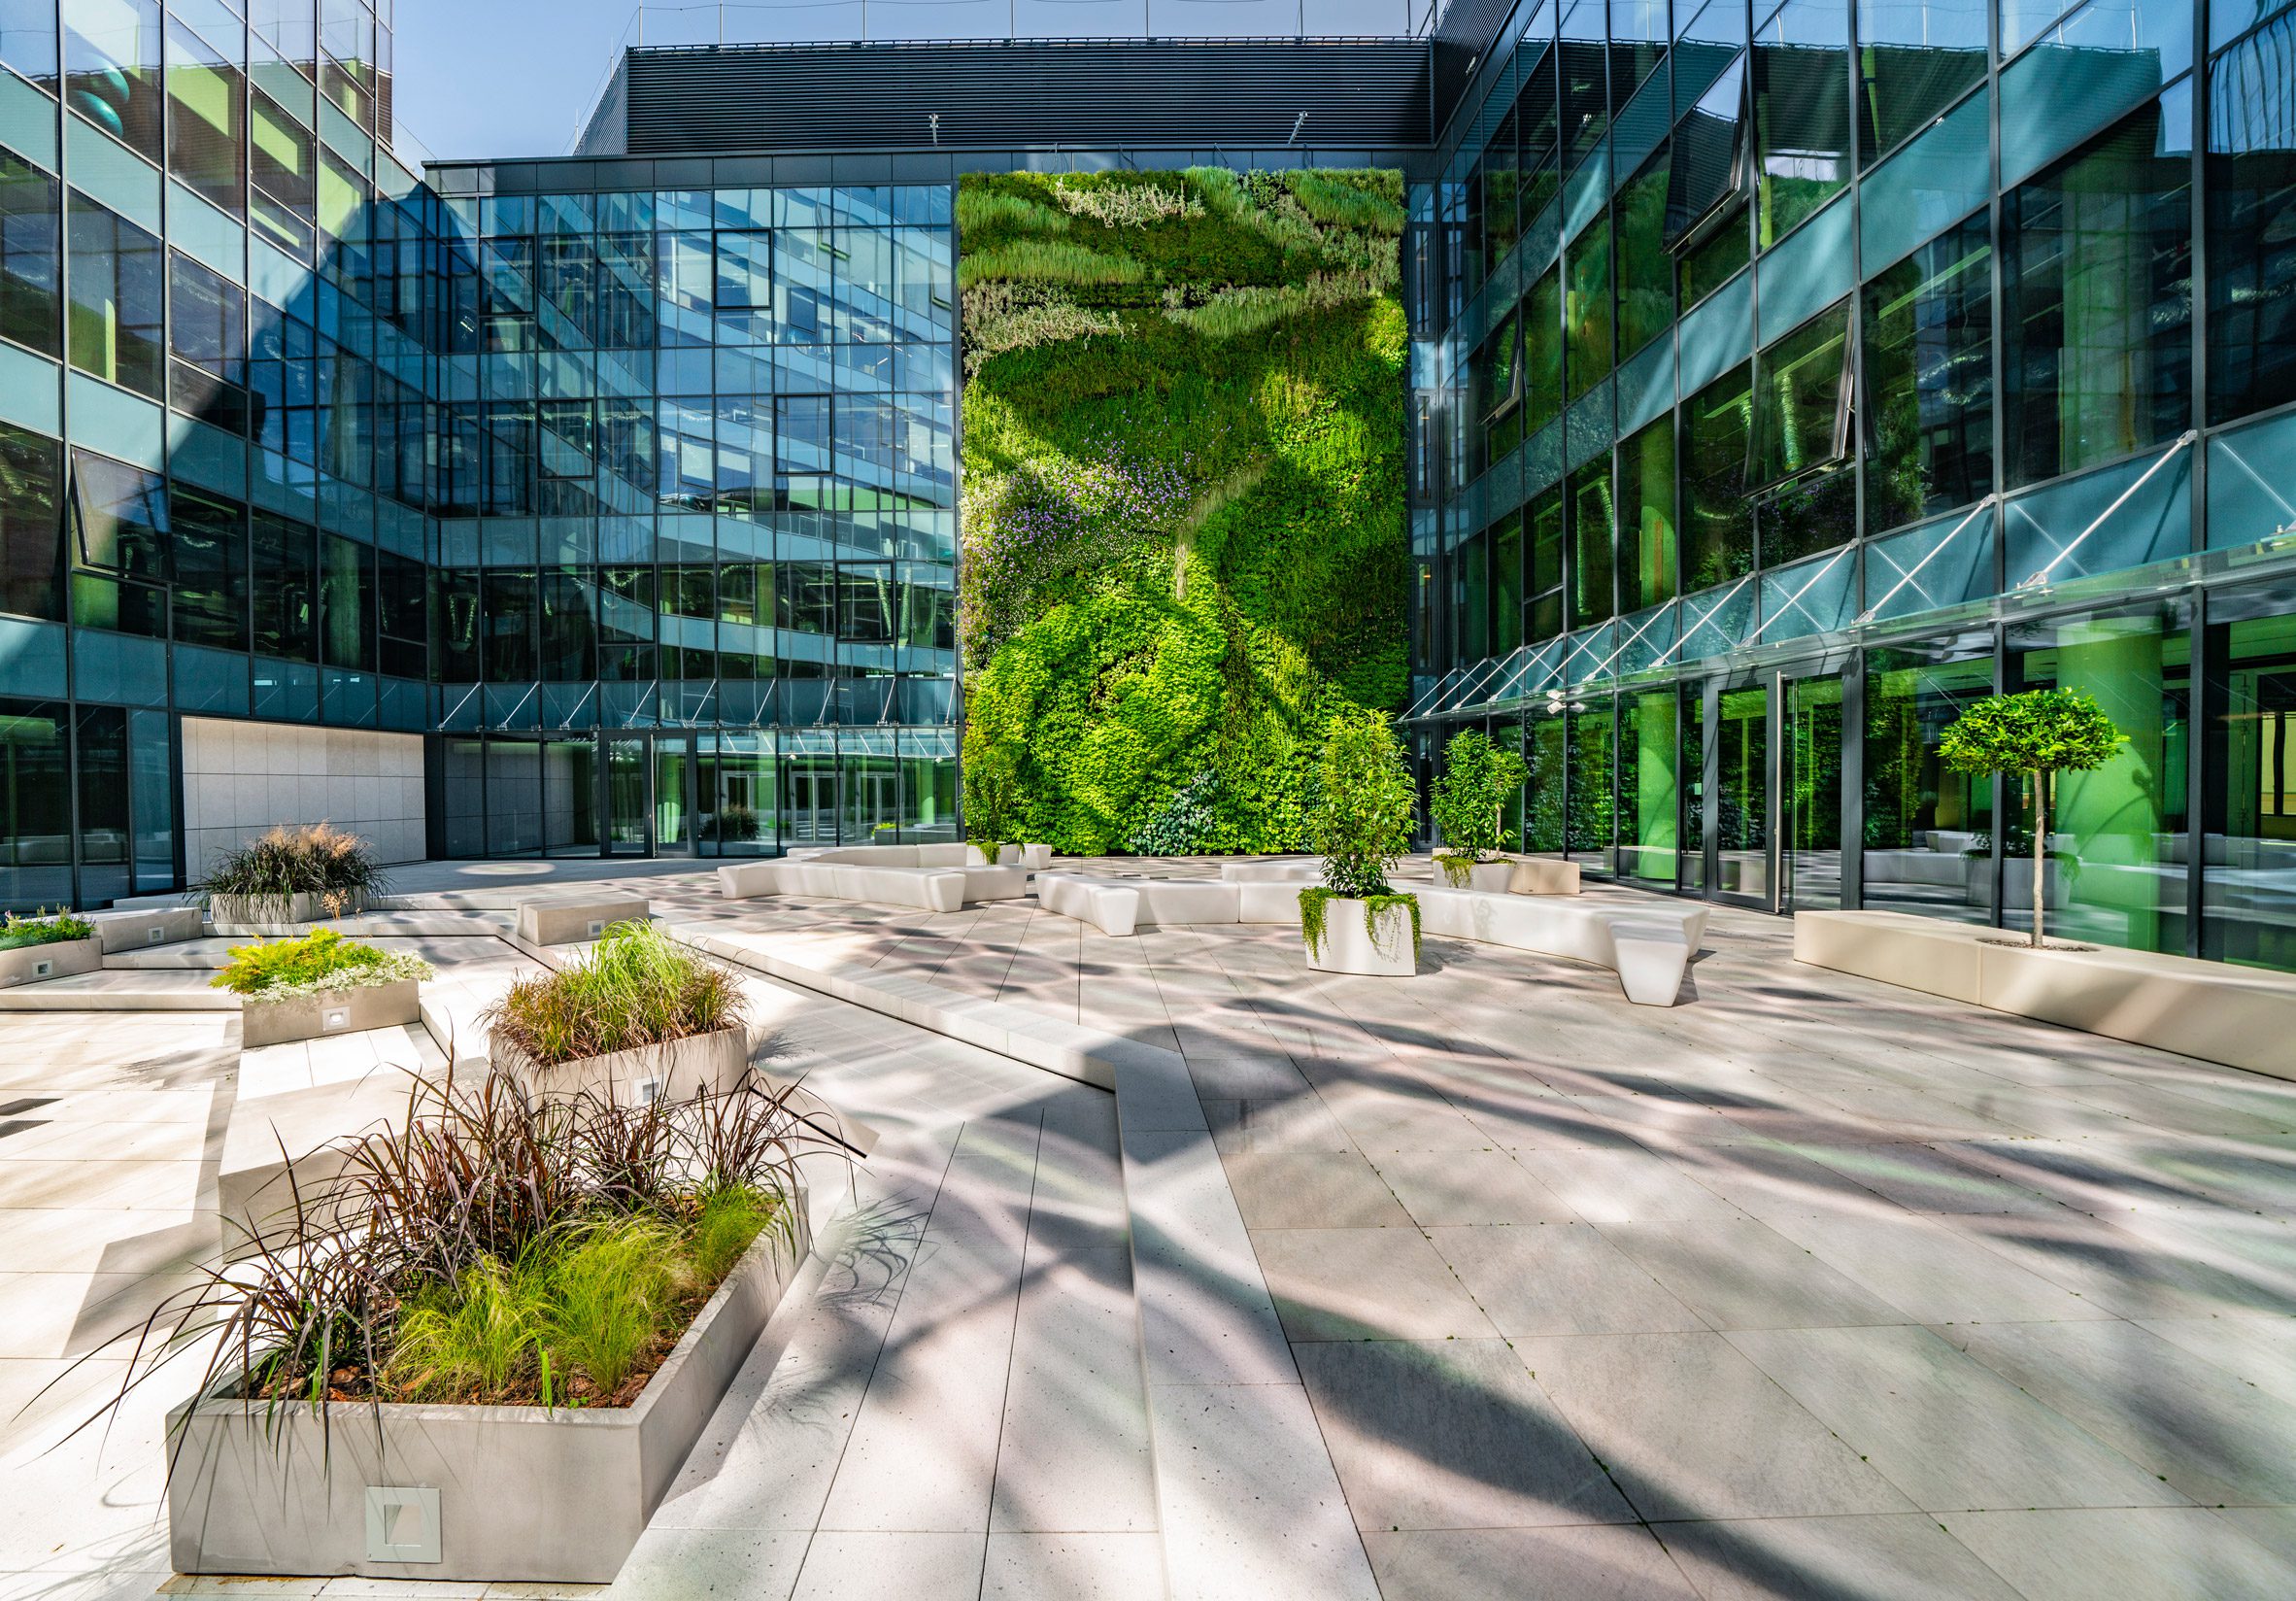 A photograph of glass building with green wall